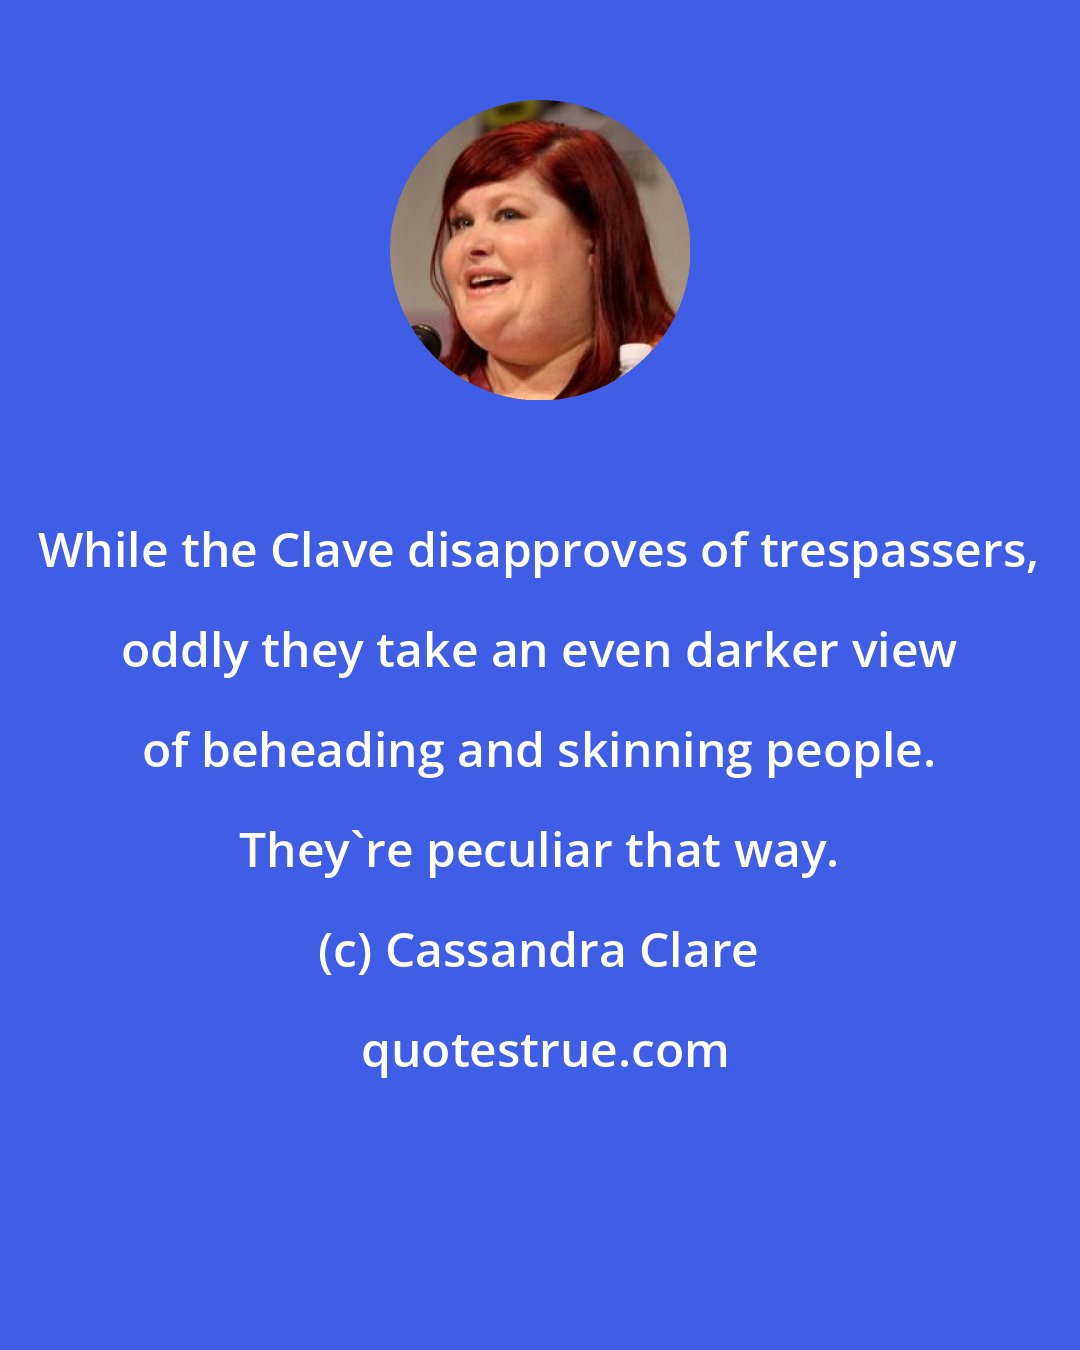 Cassandra Clare: While the Clave disapproves of trespassers, oddly they take an even darker view of beheading and skinning people. They're peculiar that way.